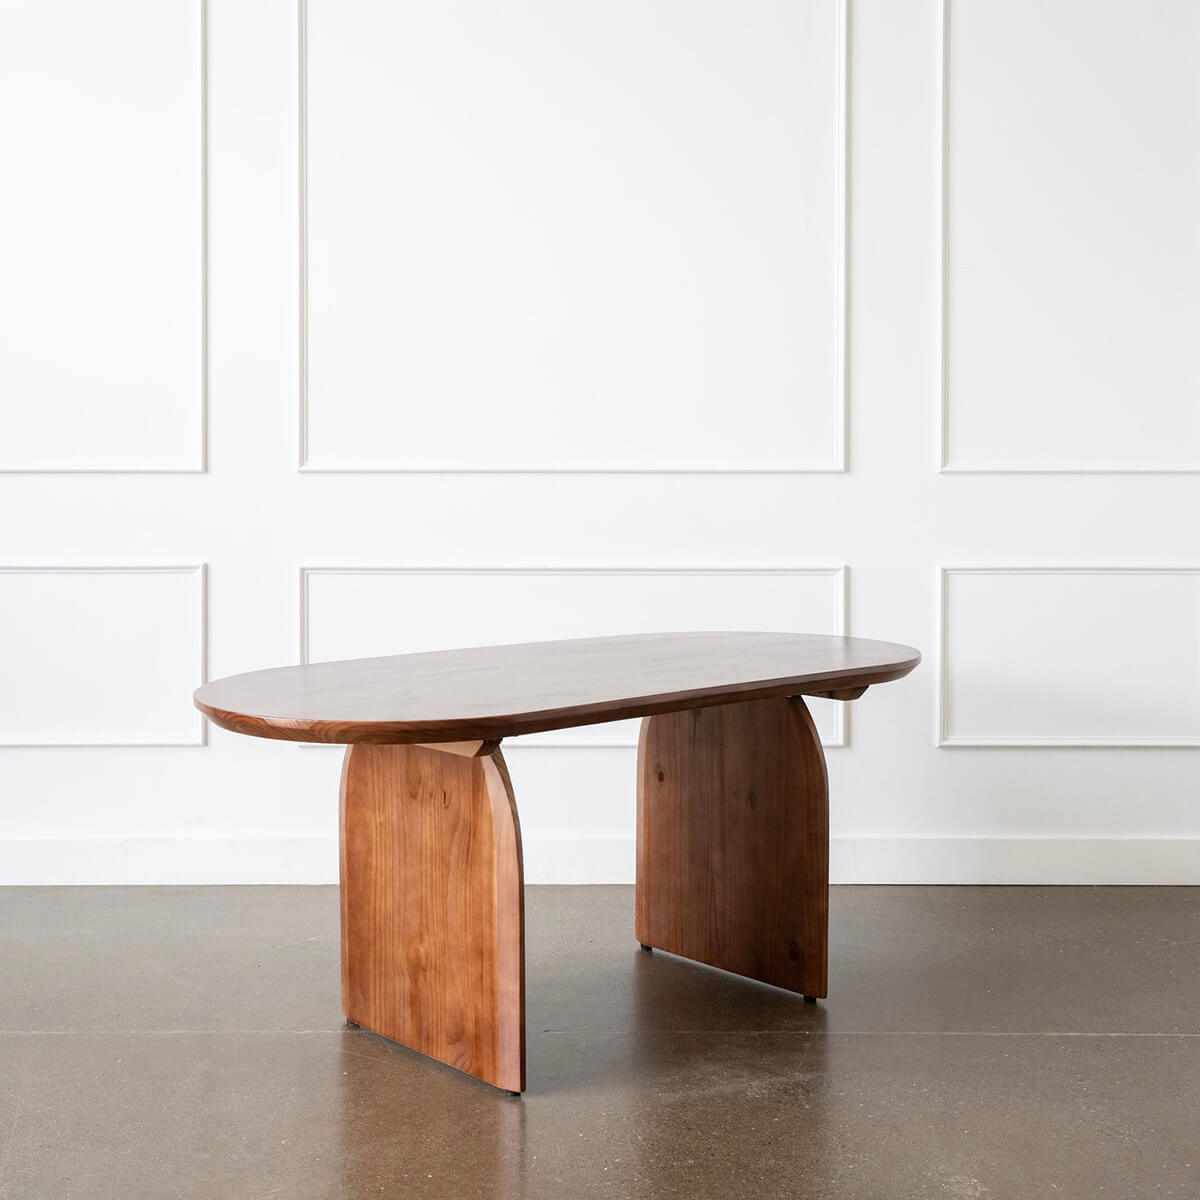 Hedy - New Zealand Pine Dining Table 101"